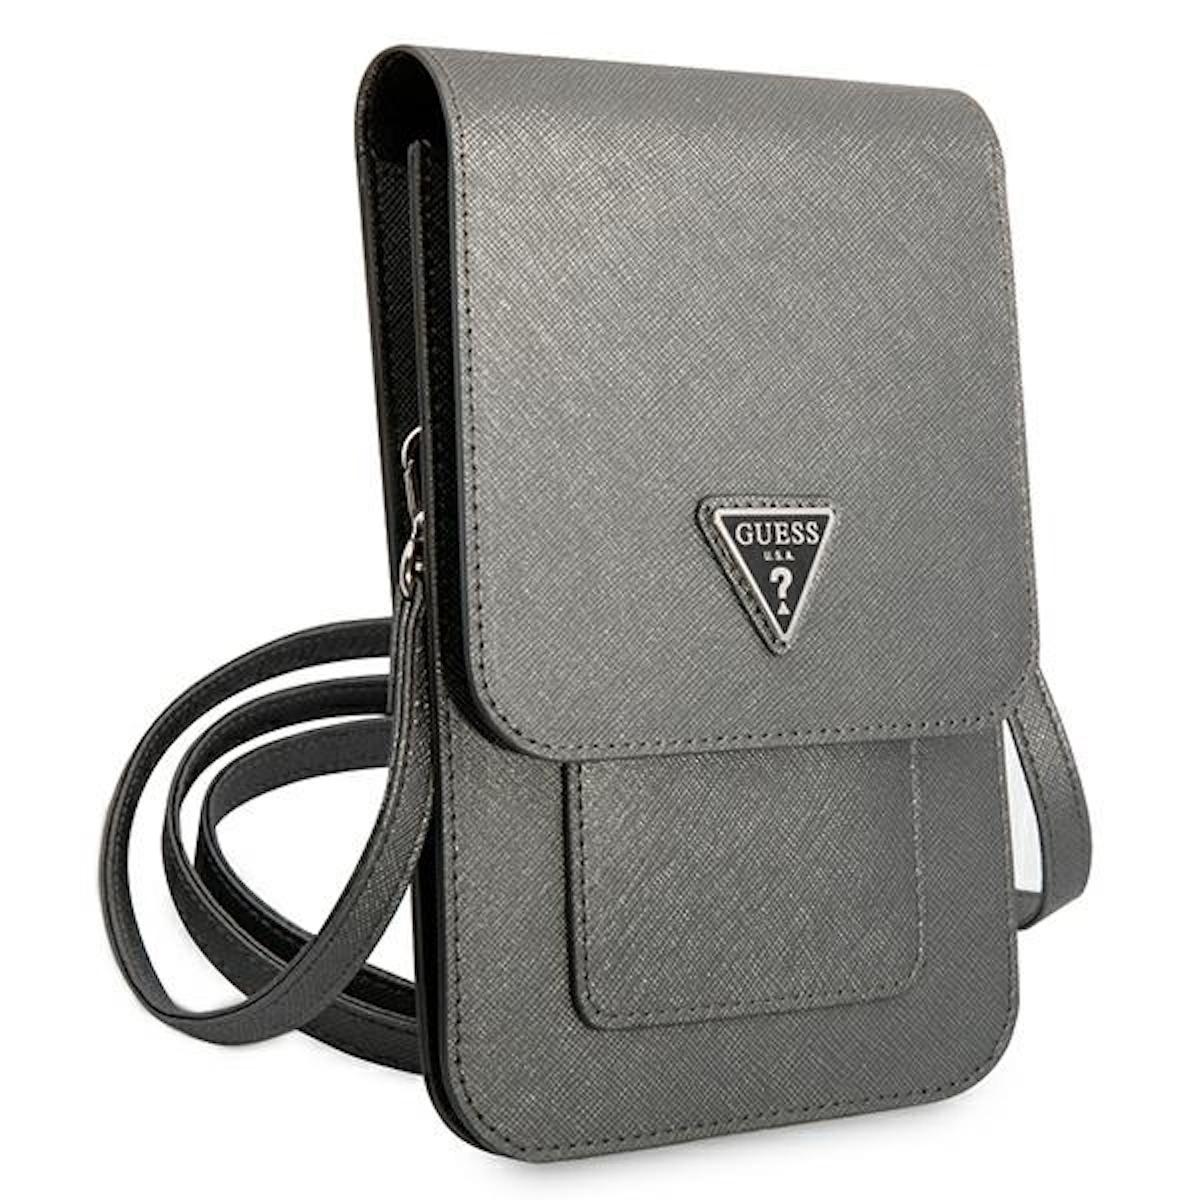 GUESS Saffiano Triangle Grau Cover, Tasche, Universelle Umhängetasche, Full Universell